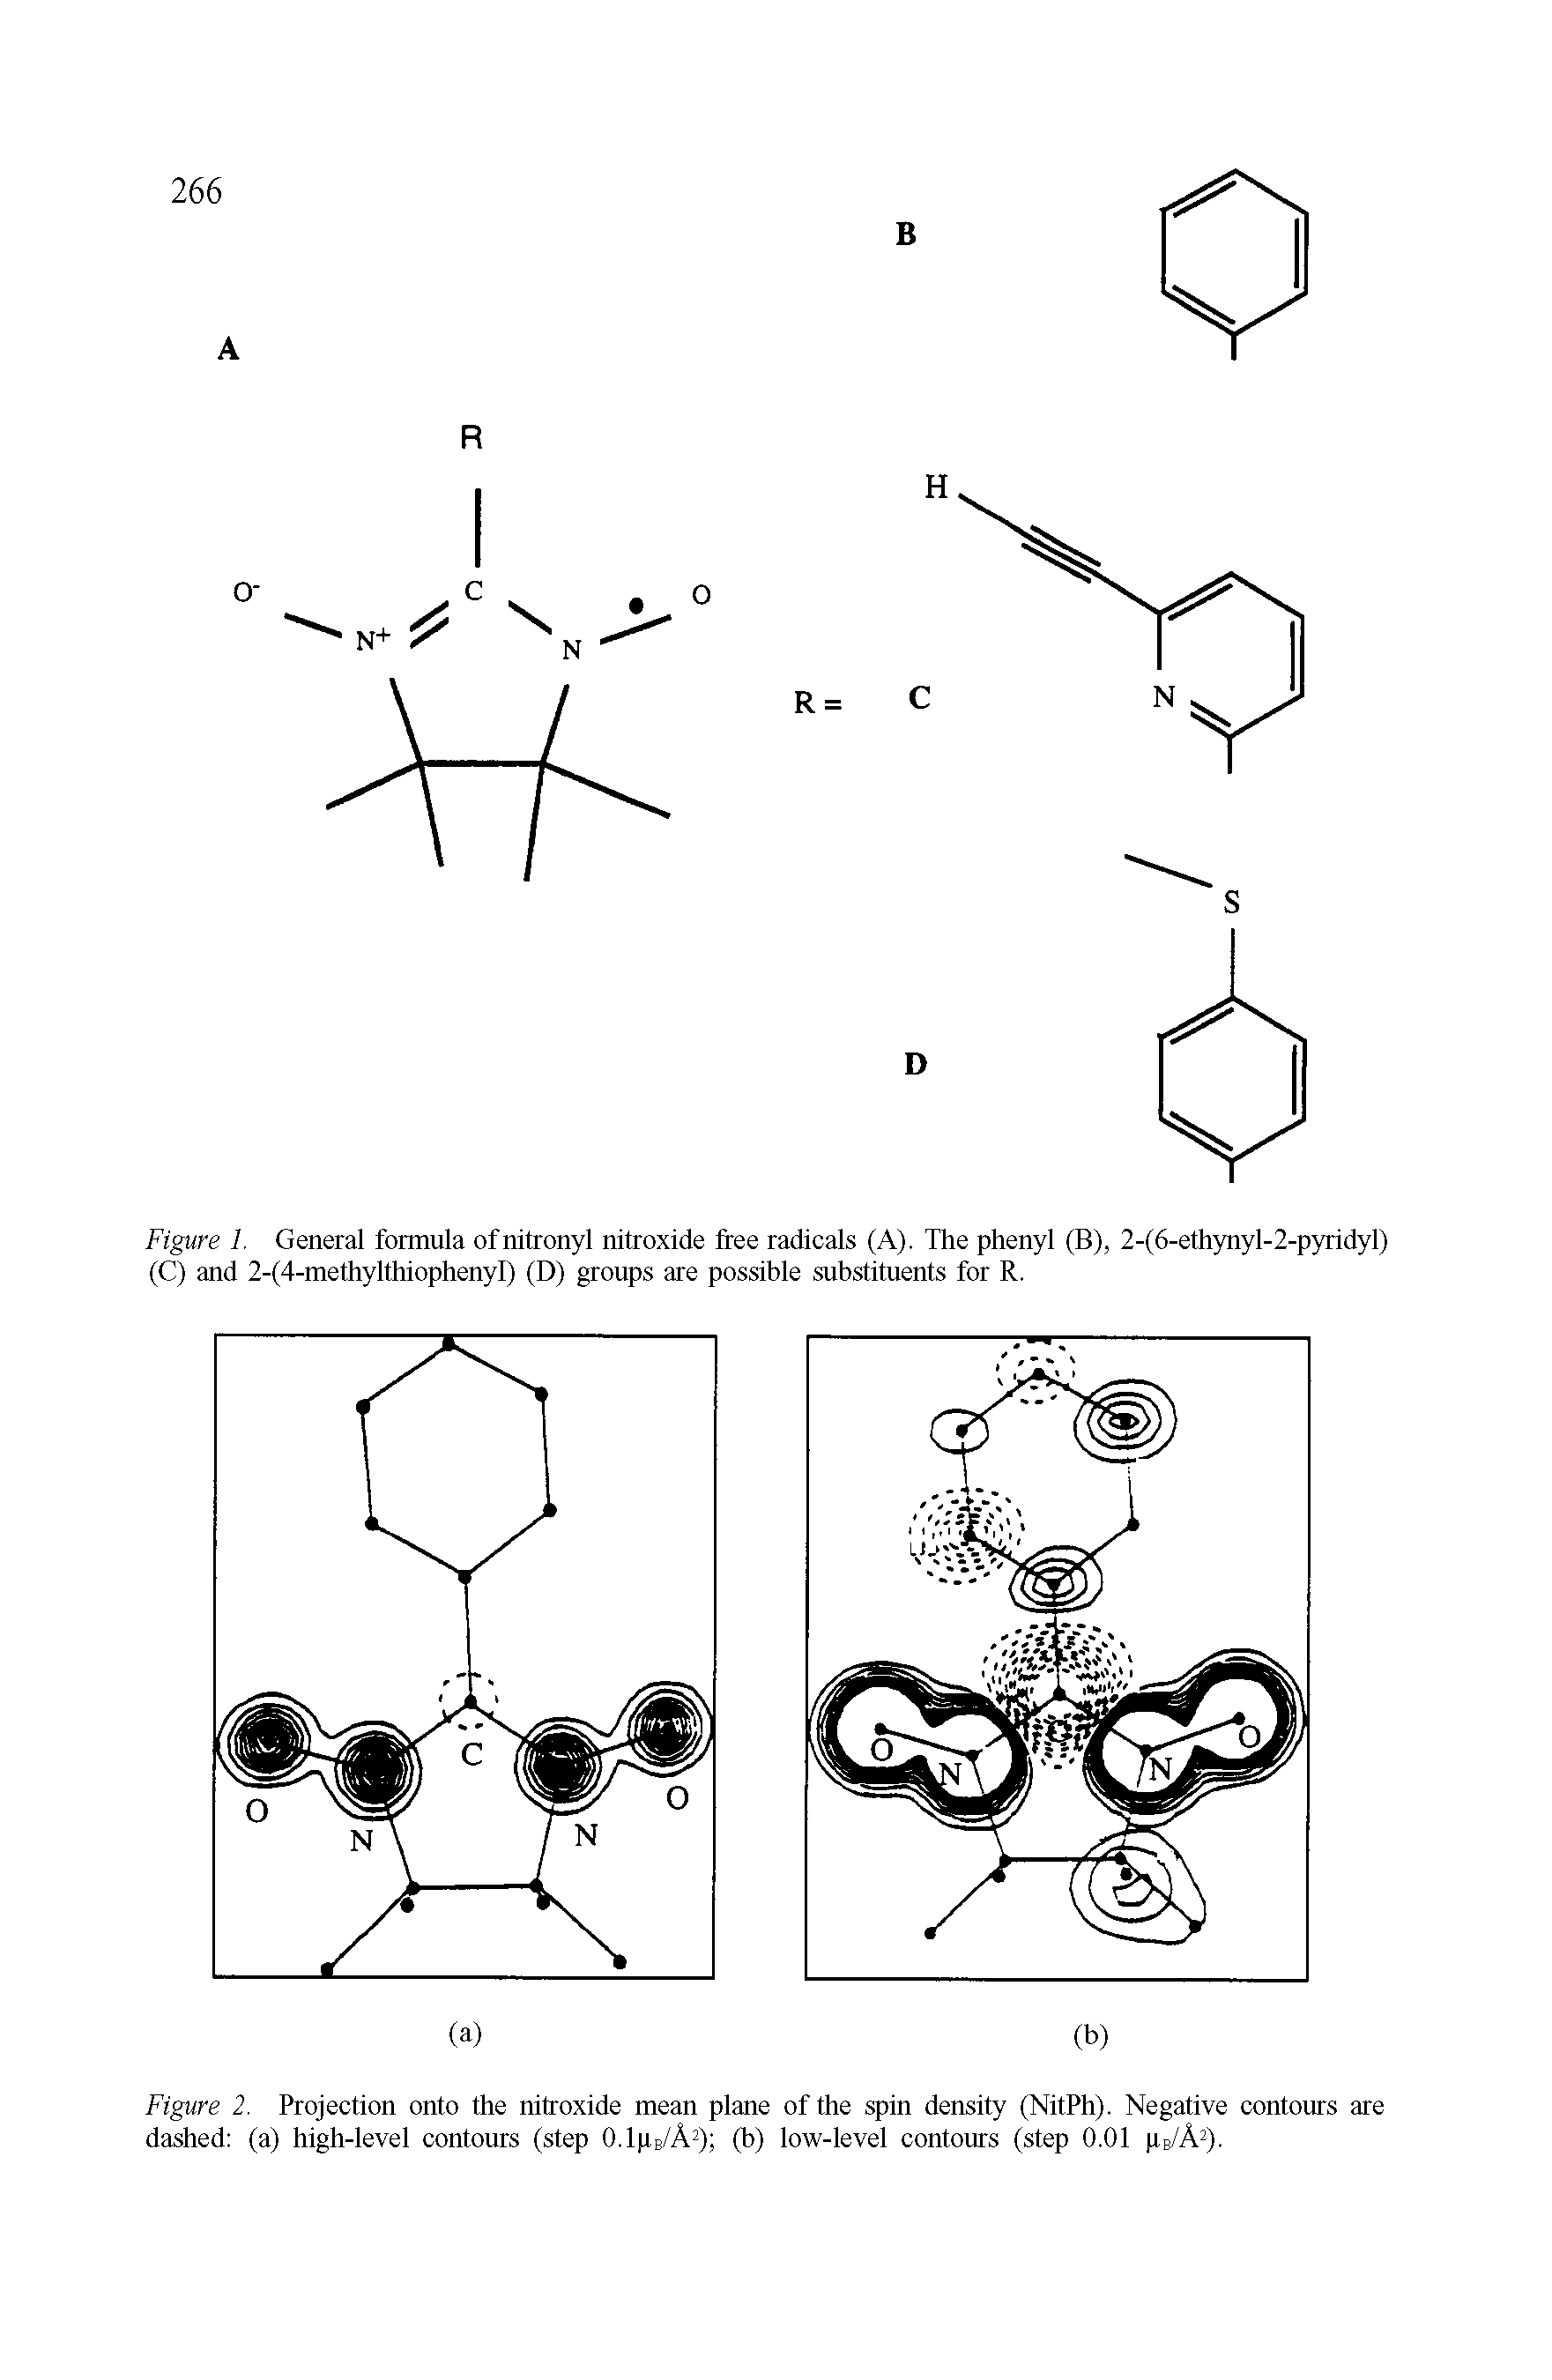 Figure 1. General formula ofnitronyl nitroxide free radicals (A). The phenyl (B), 2-(6-ethynyl-2-pyridyl) (C) and 2-(4-methylthiophenyI) (D) groups are possible substituents for R.